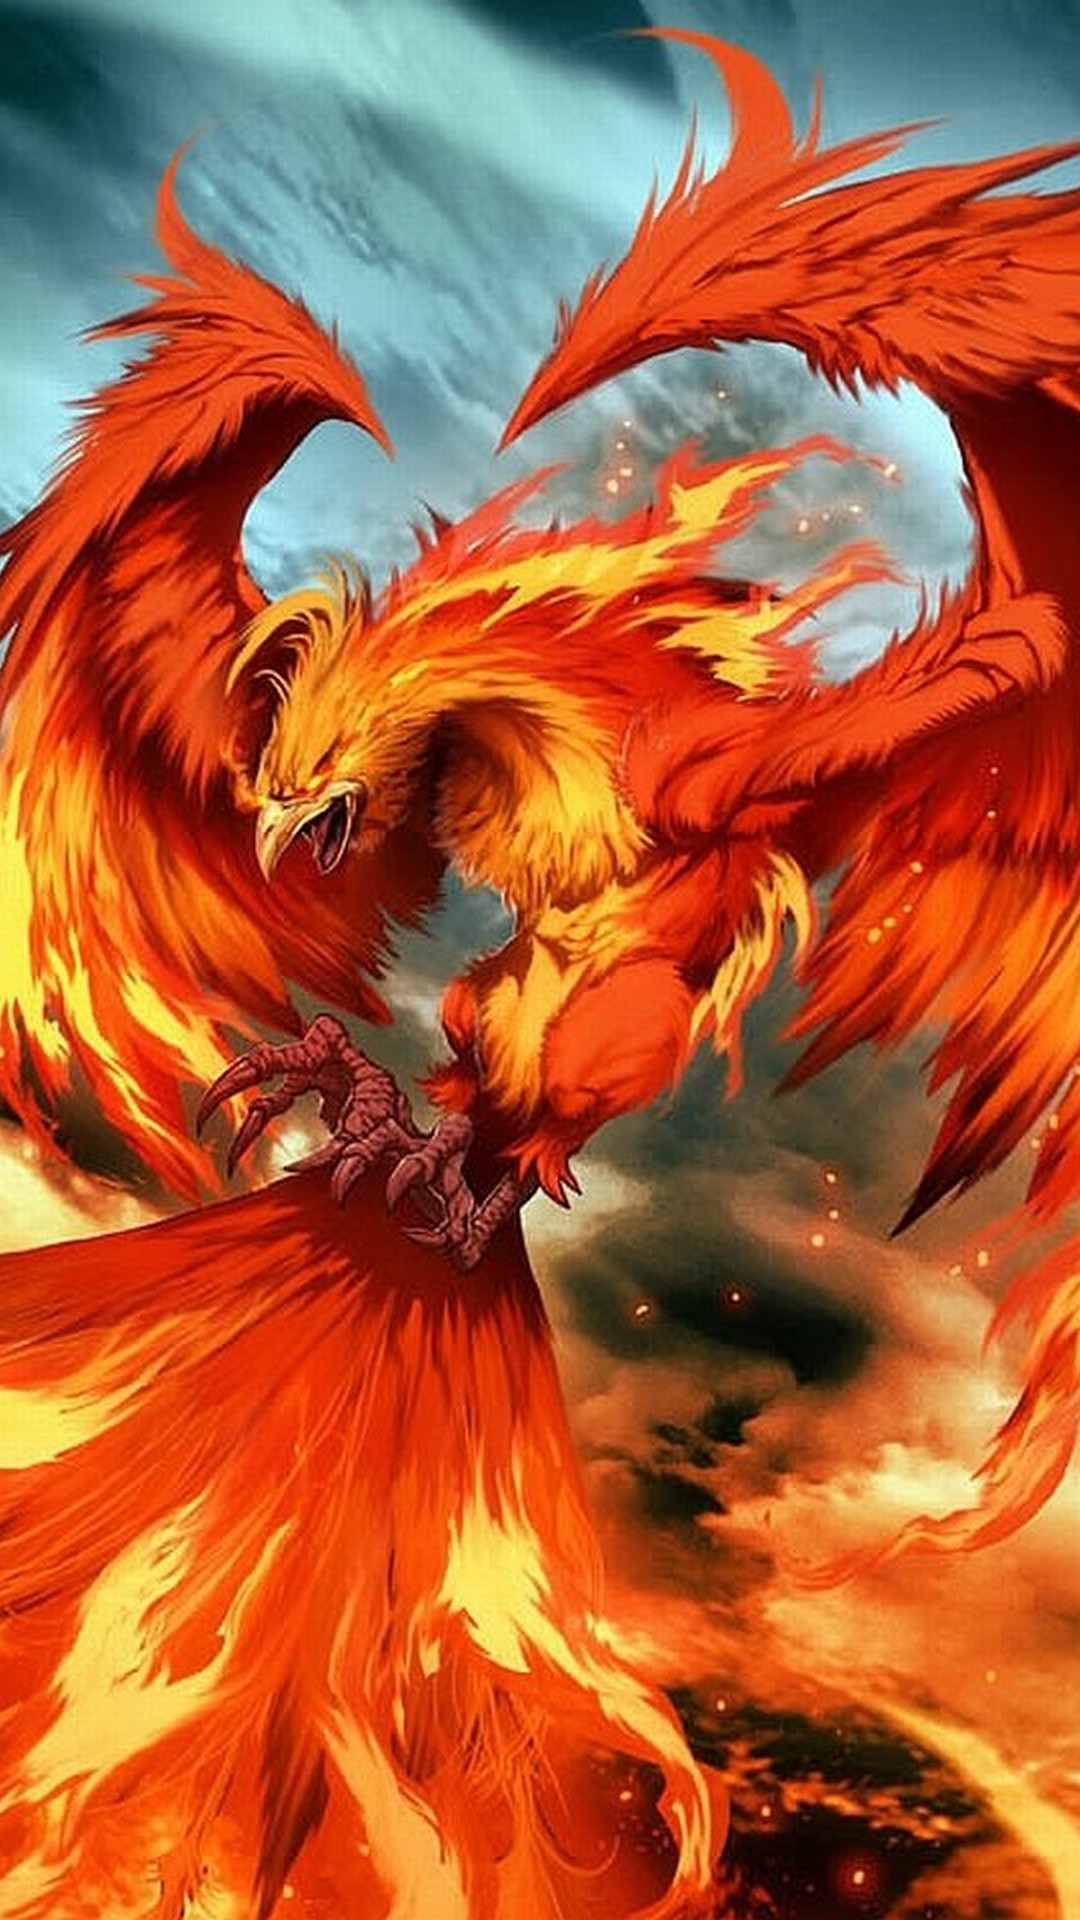 Phoenix Images Wallpaper For Android with image resolution 1080x1920 pixel. You can make this wallpaper for your Android backgrounds, Tablet, Smartphones Screensavers and Mobile Phone Lock Screen